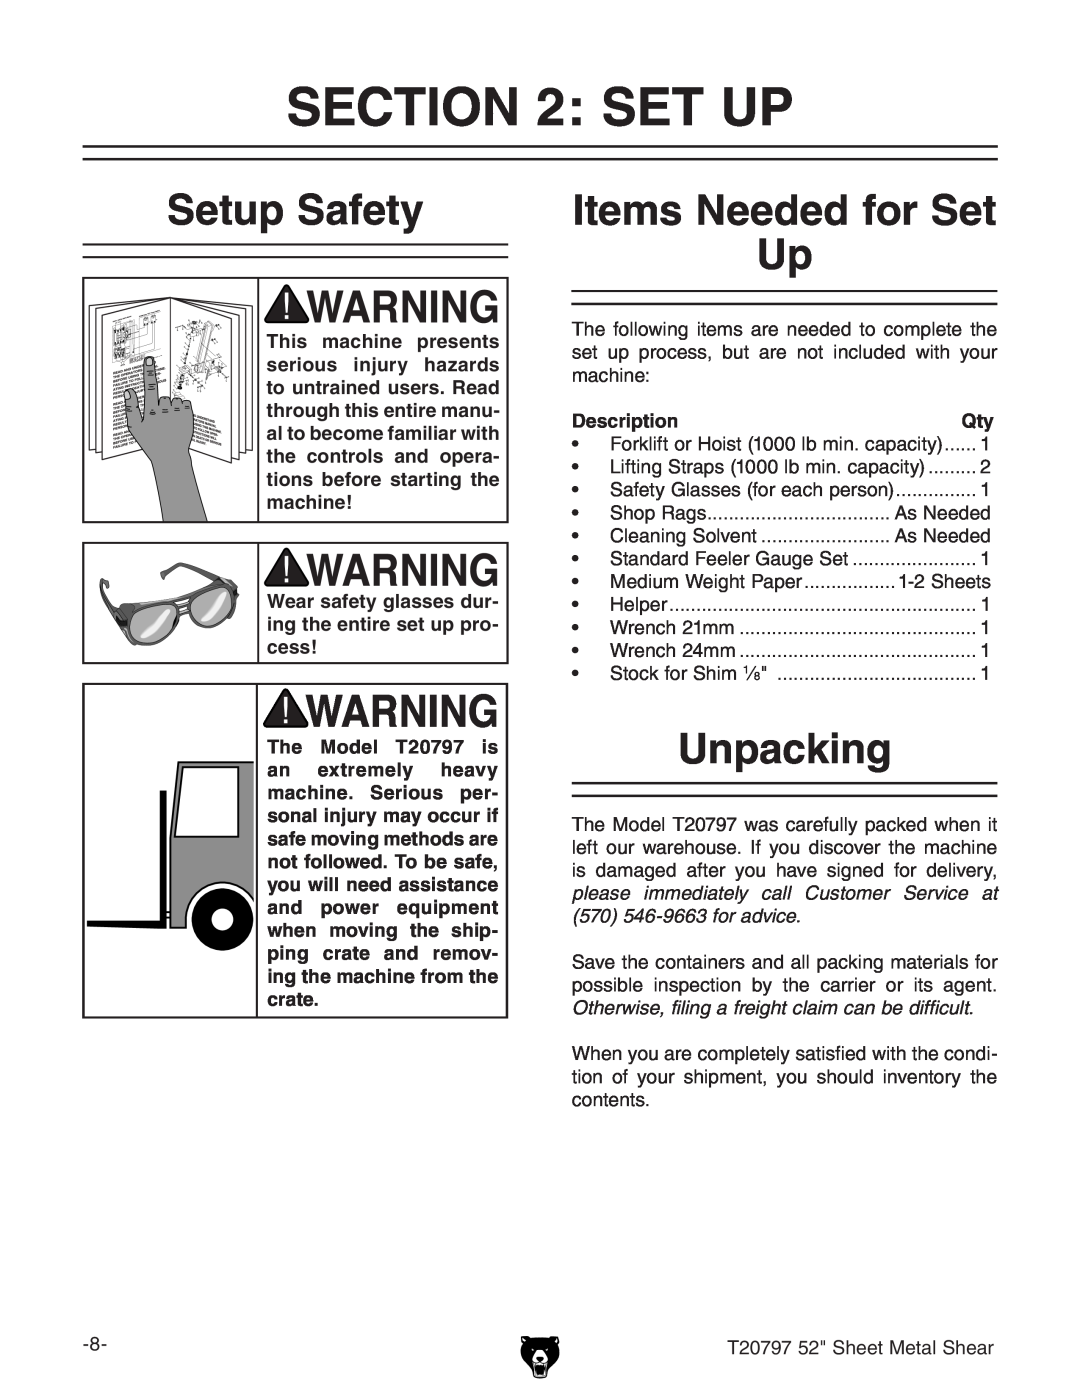 Grizzly T20797 owner manual Set Up, Setup Safety, Items Needed for Set, Unpacking, Description, I%,.,*HZZiBZiVaHZVg 